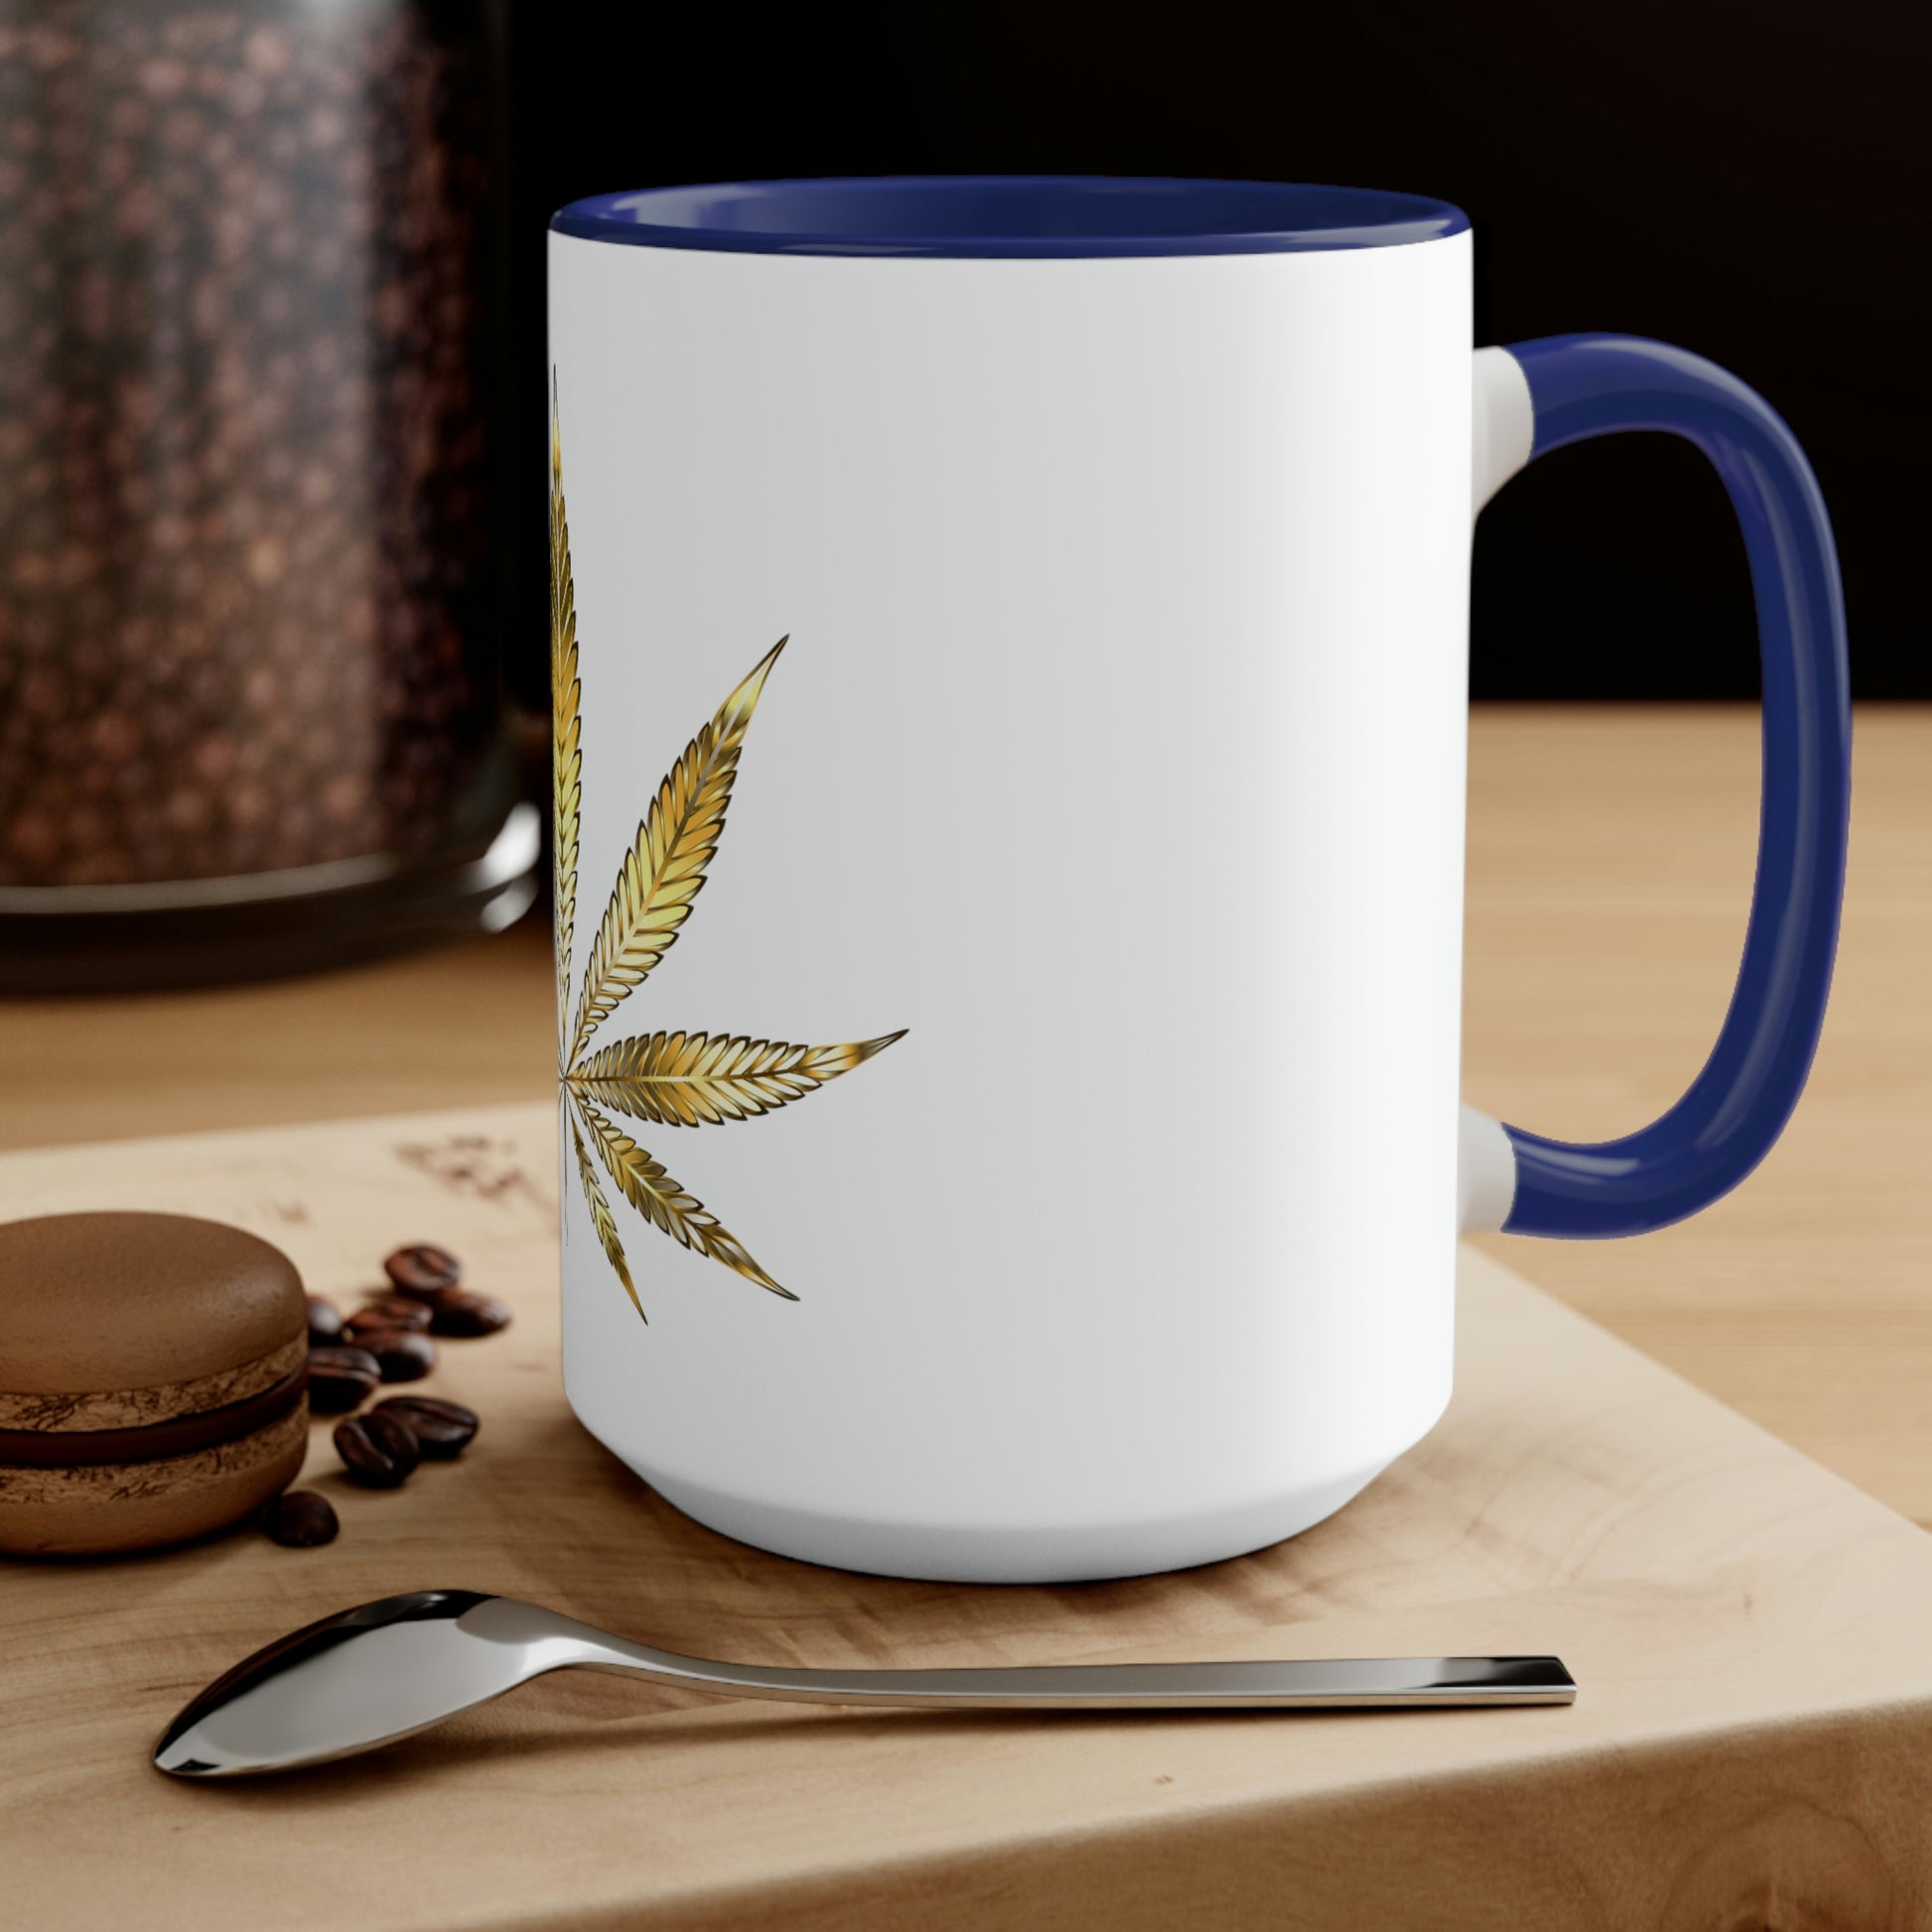 A white cannabis mug with navy blue interior featuring a bright gold weed leaf on the front center, sitting on a wood base.